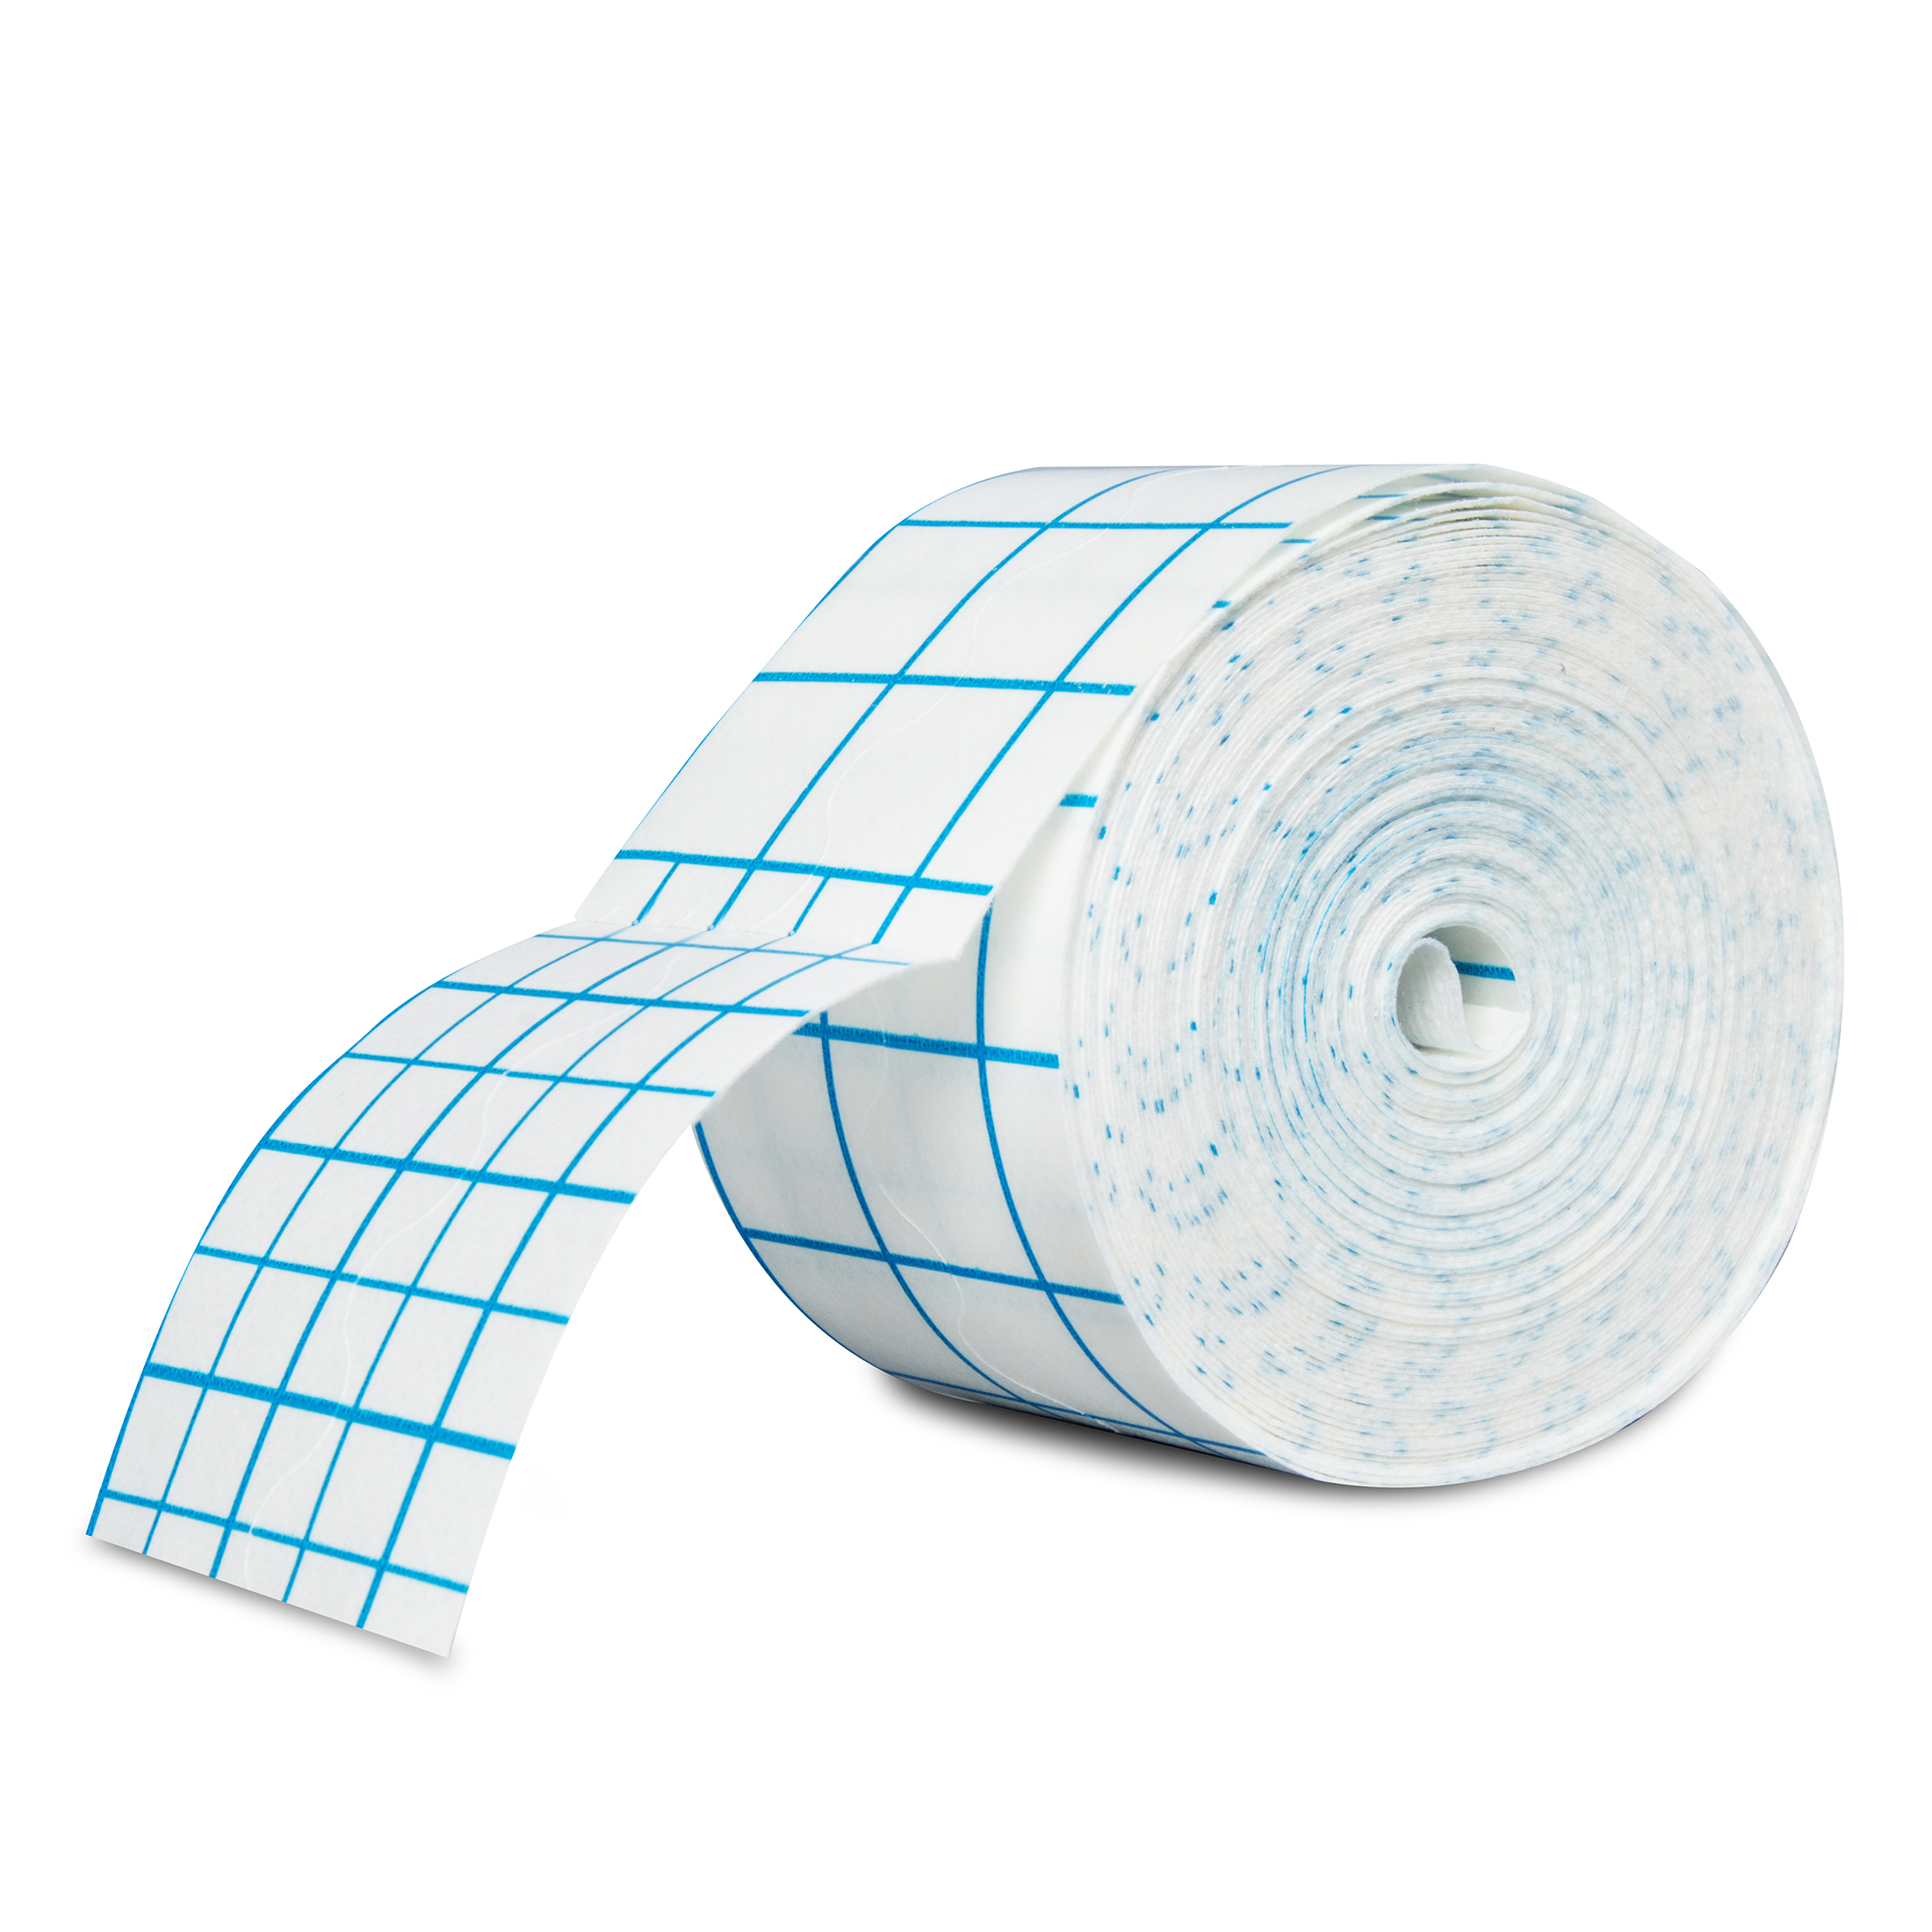 Understanding the Different Types of Medical Tapes